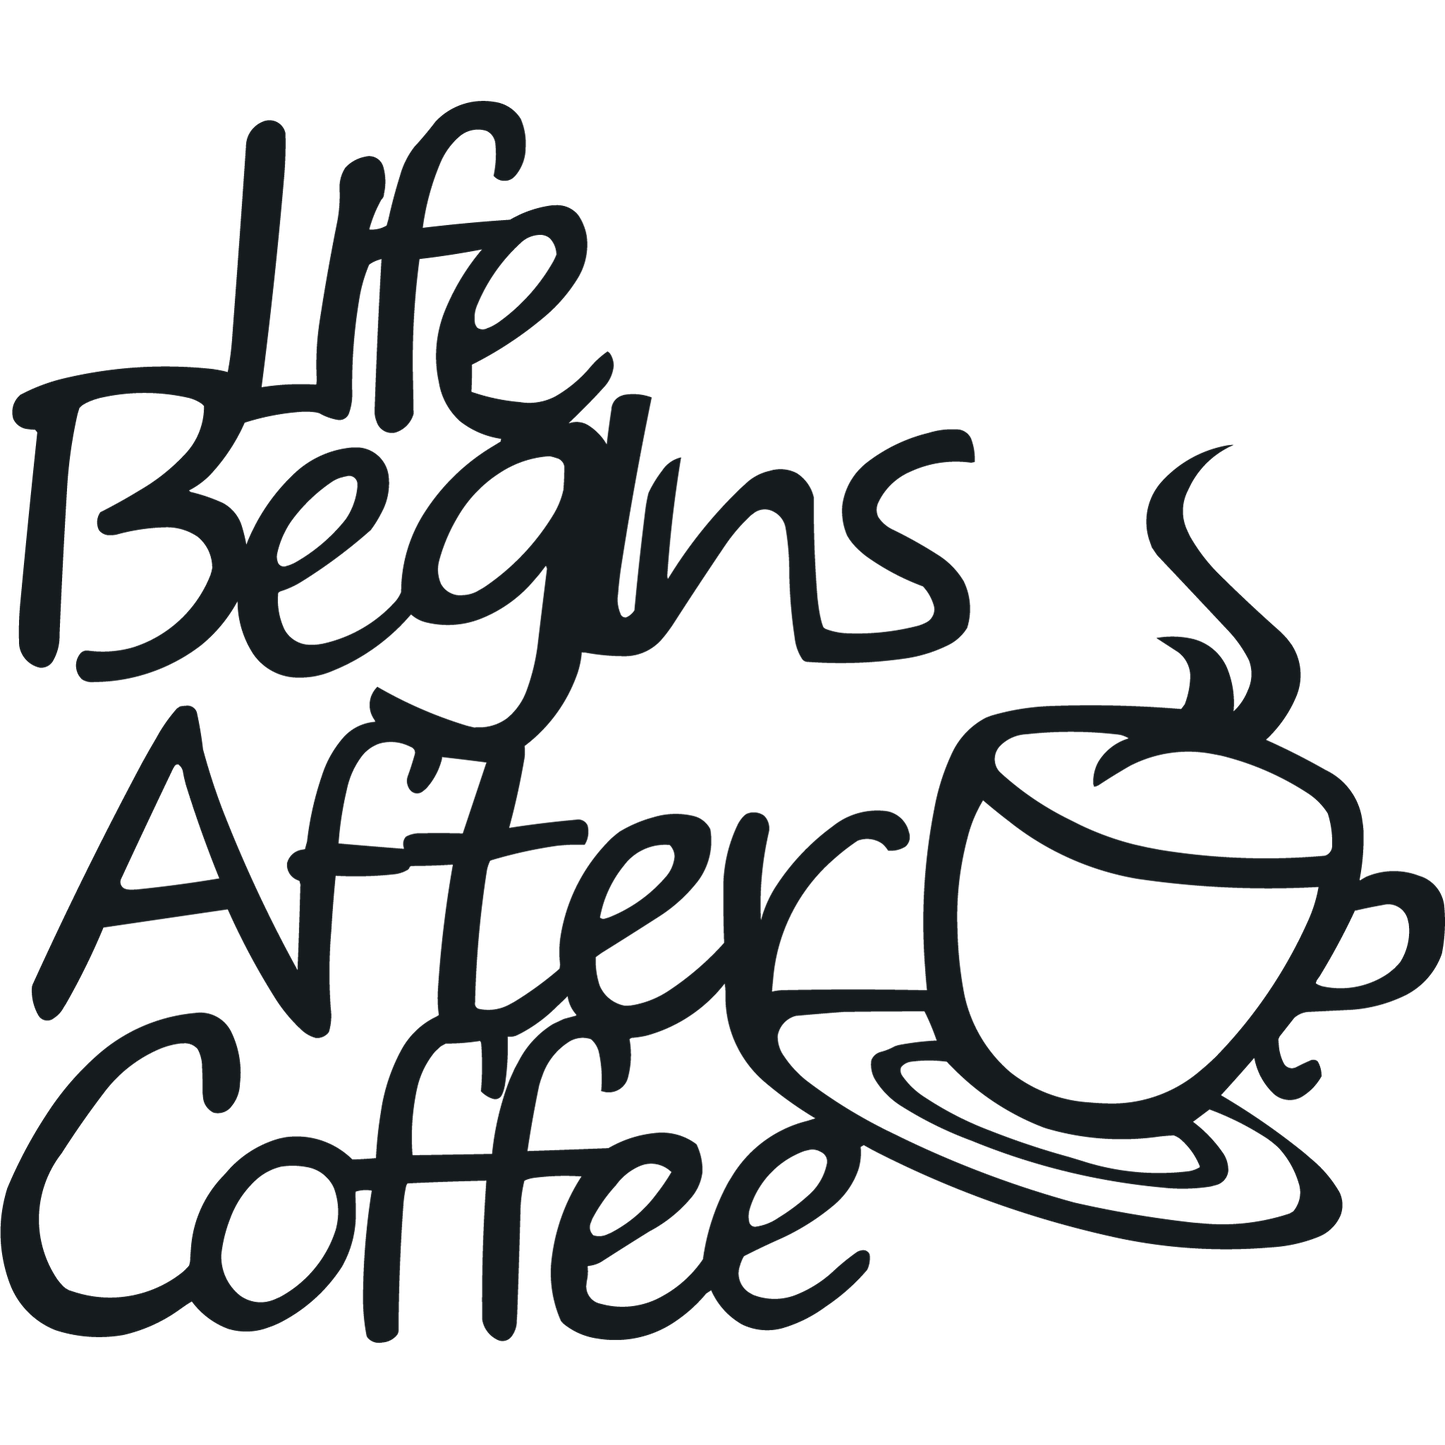 Life Begins After Coffee - Wall Art Sign Black - Badger Steel USA